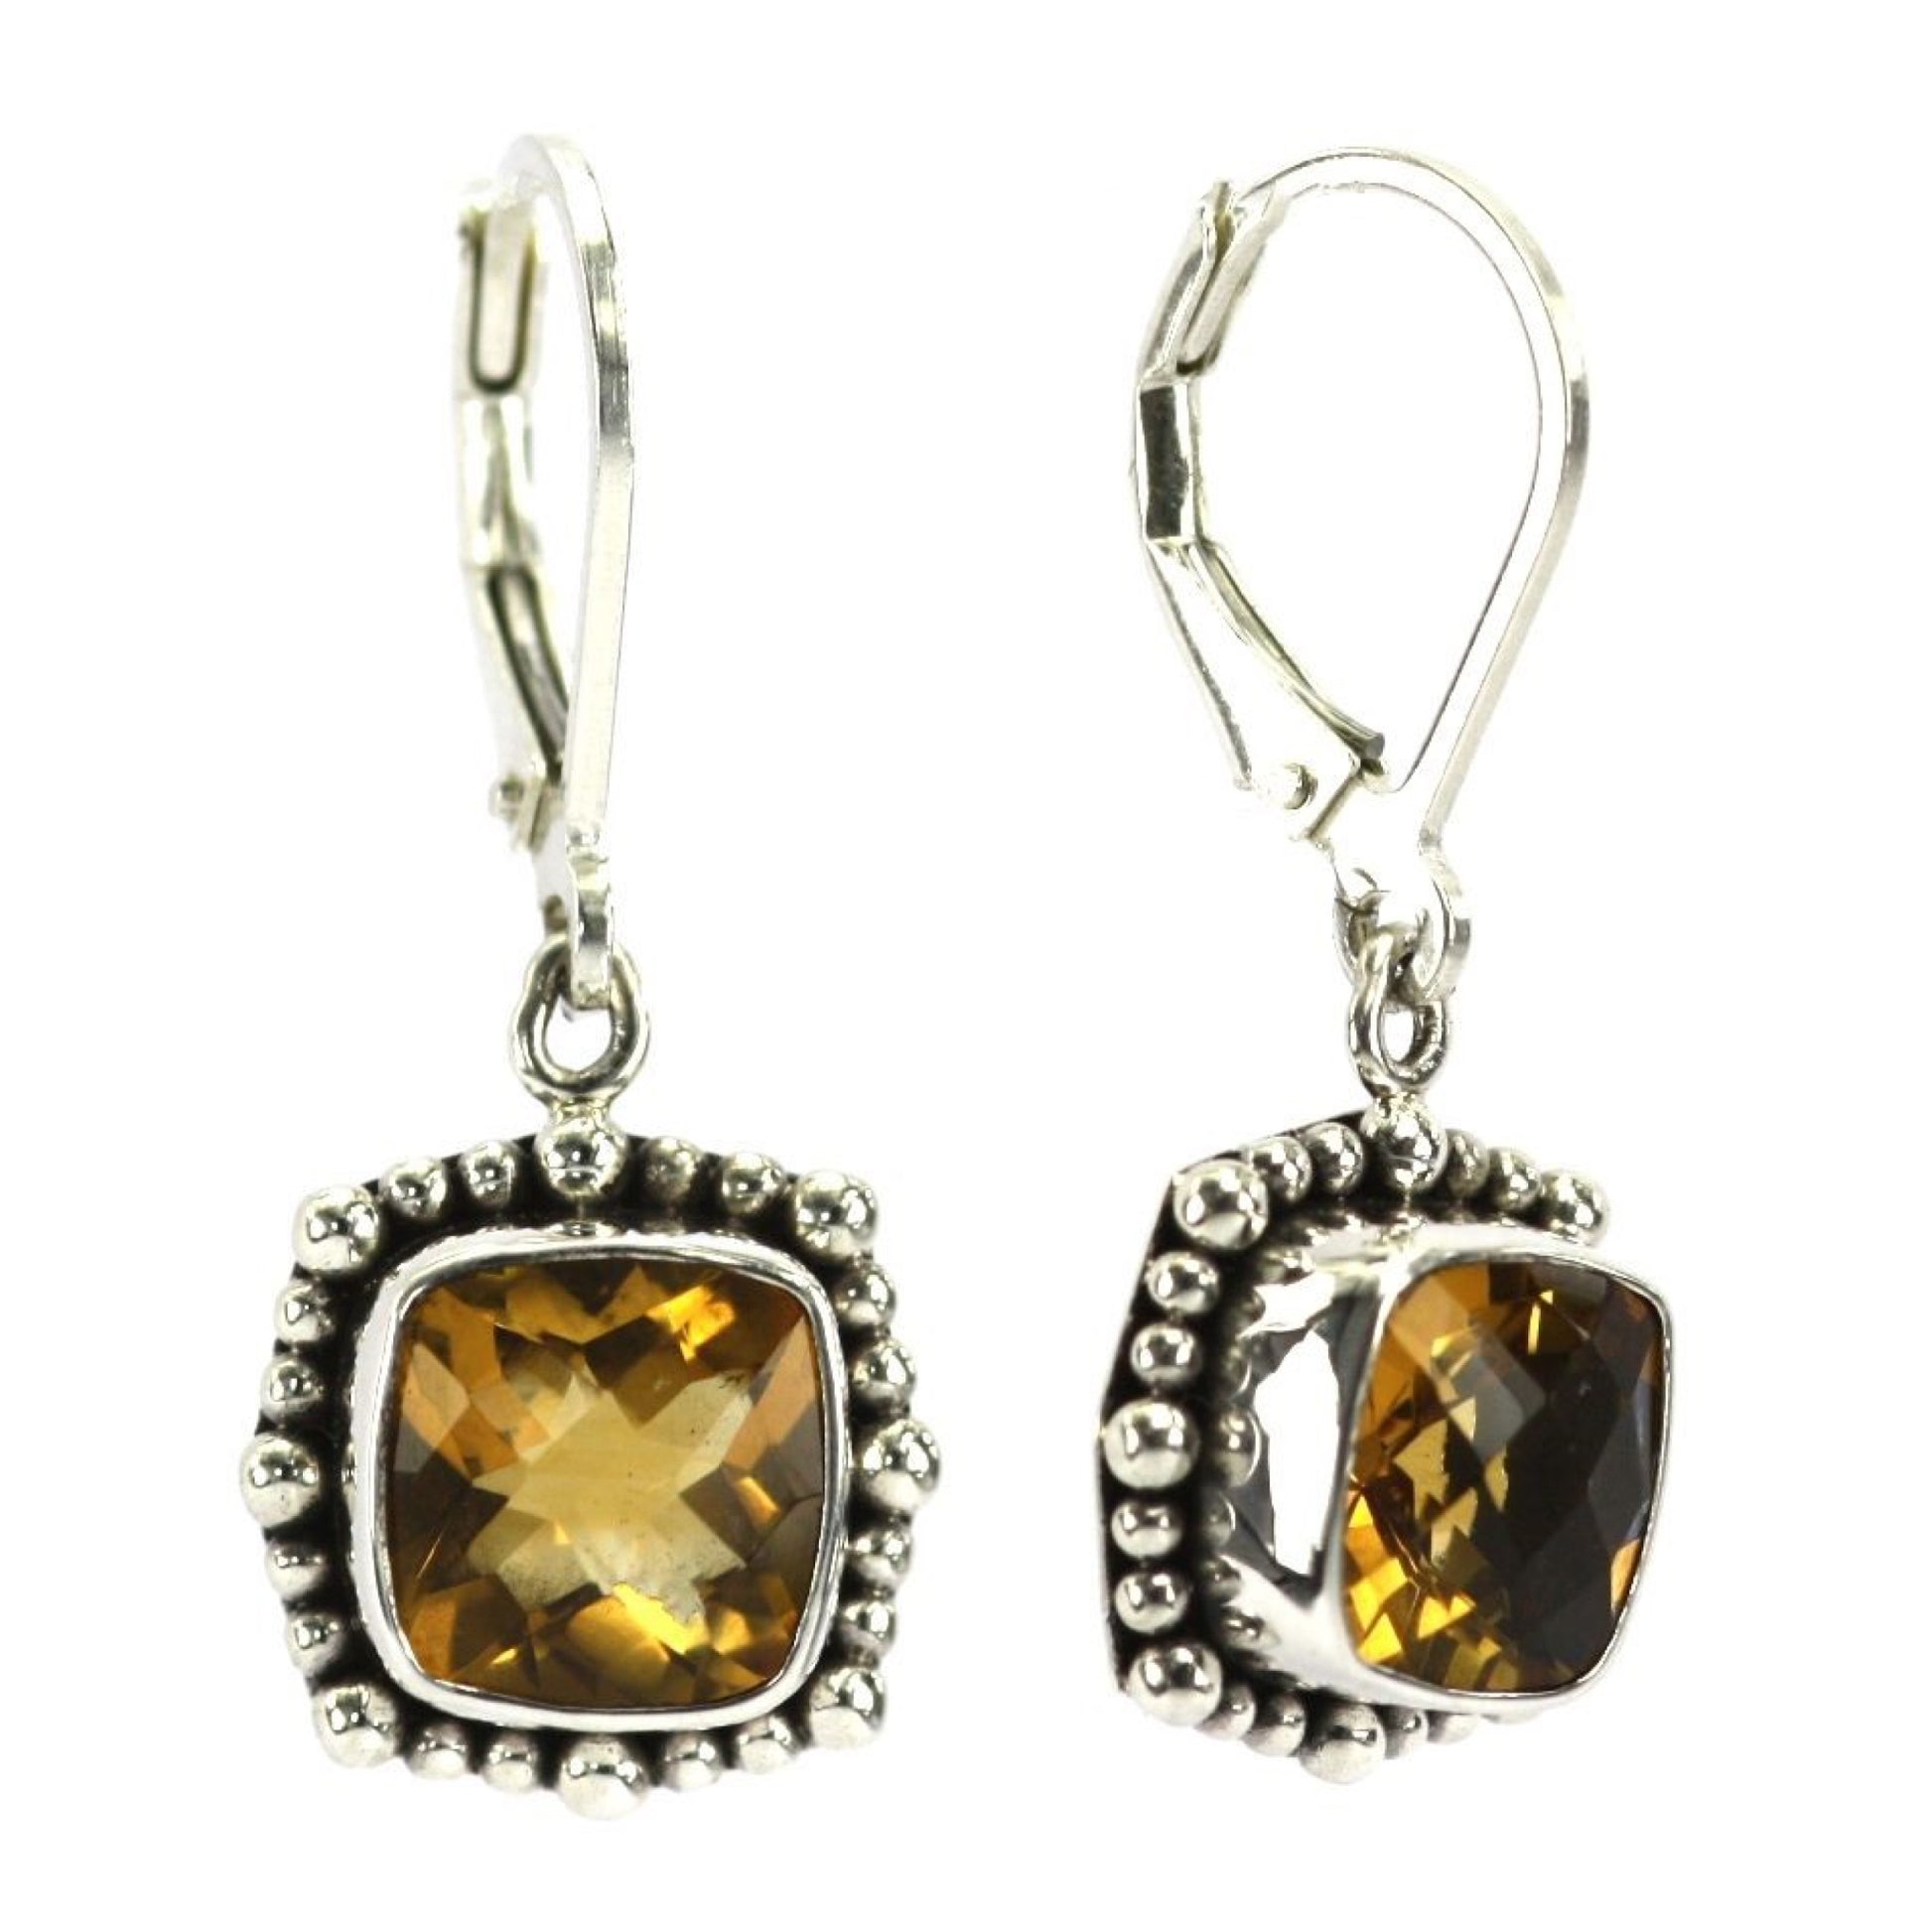 Silver earrings with square citrine gemstones.